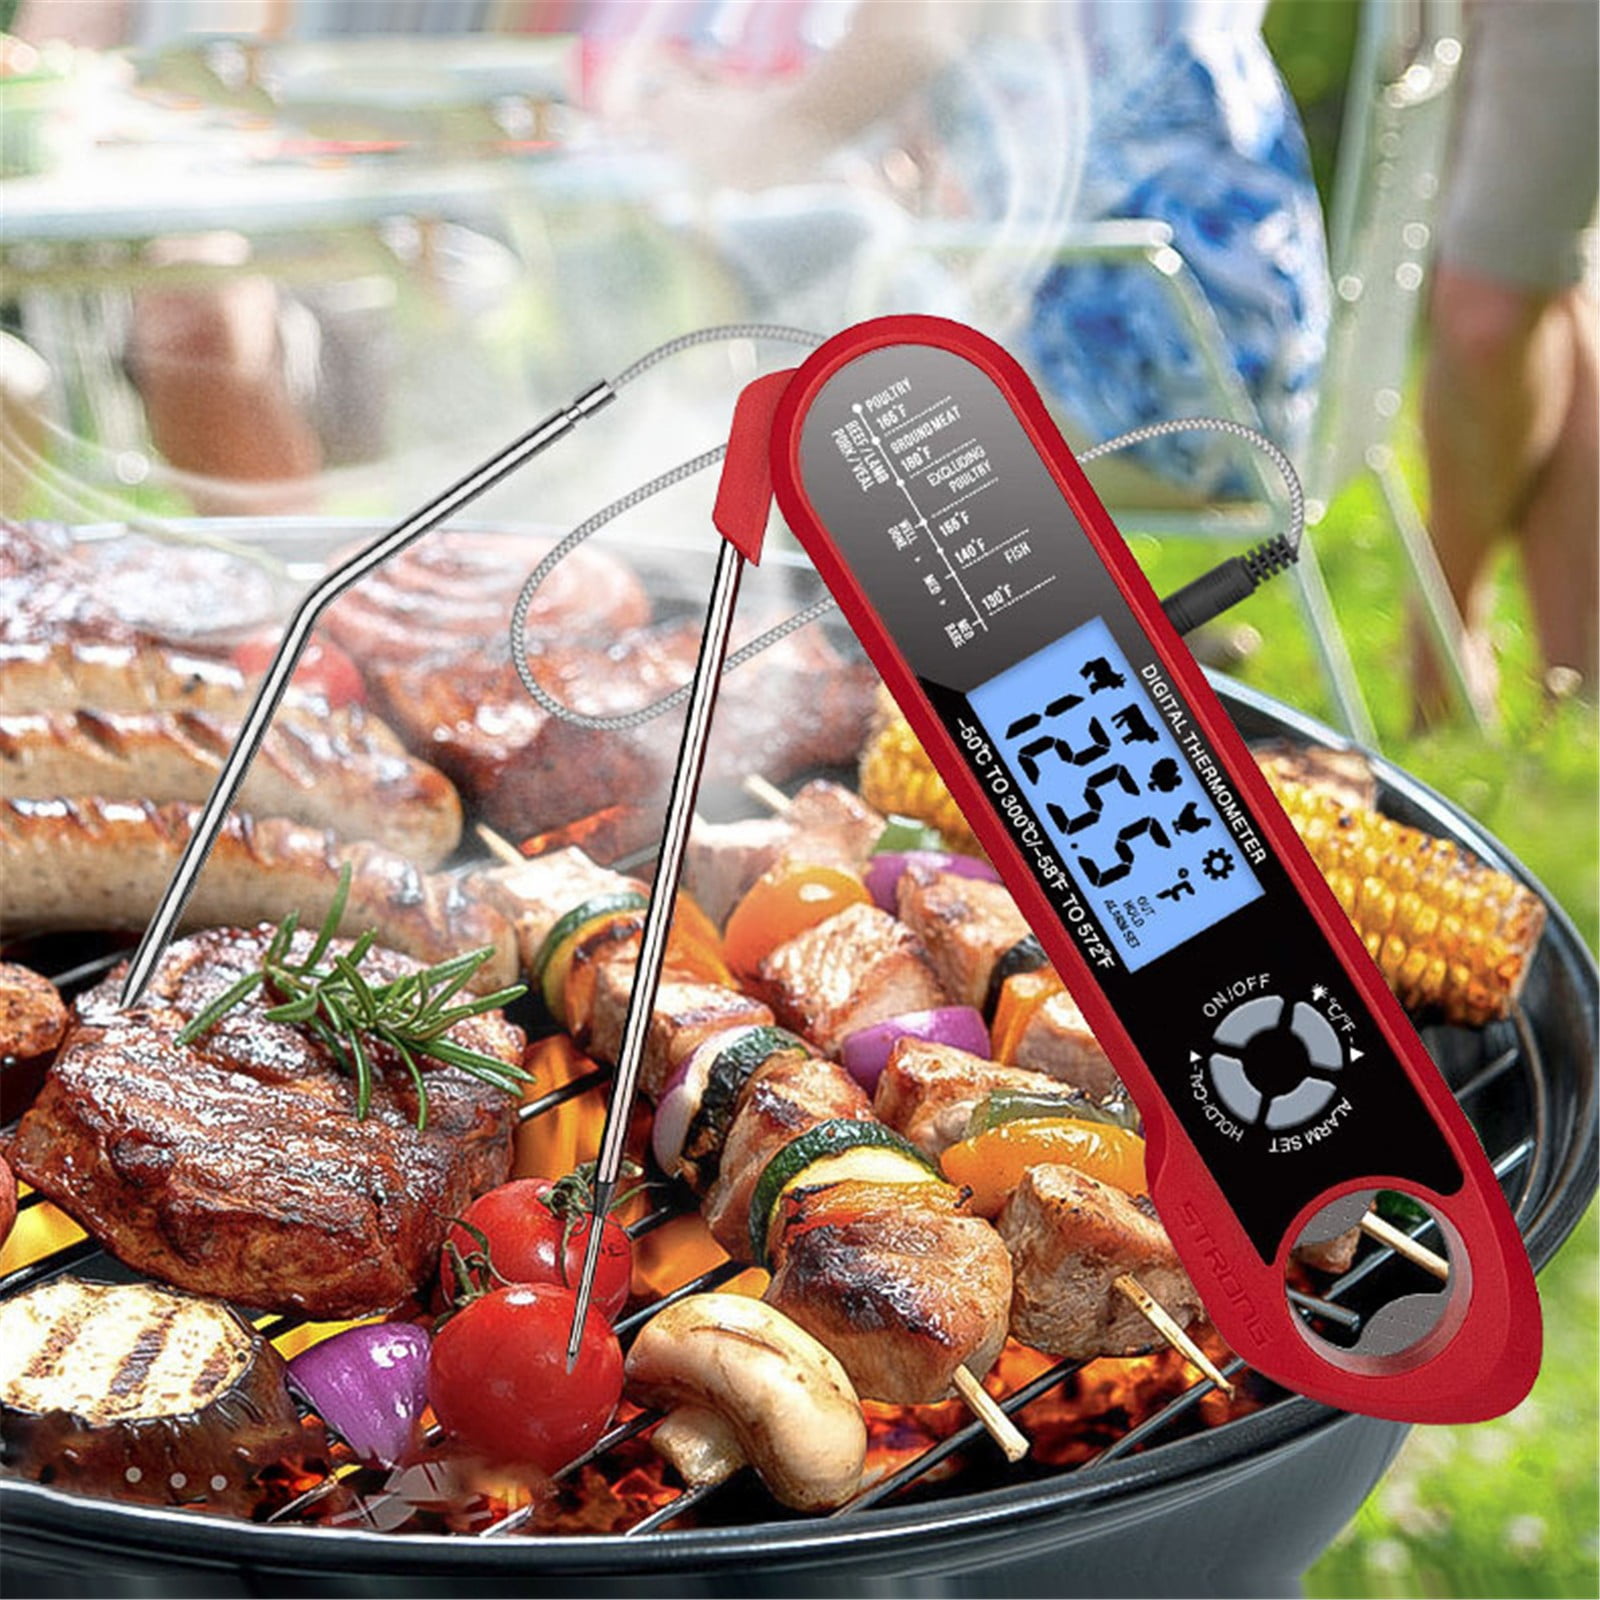 Thermopro Tp510w Waterproof Digital Candy Thermometer With Pot